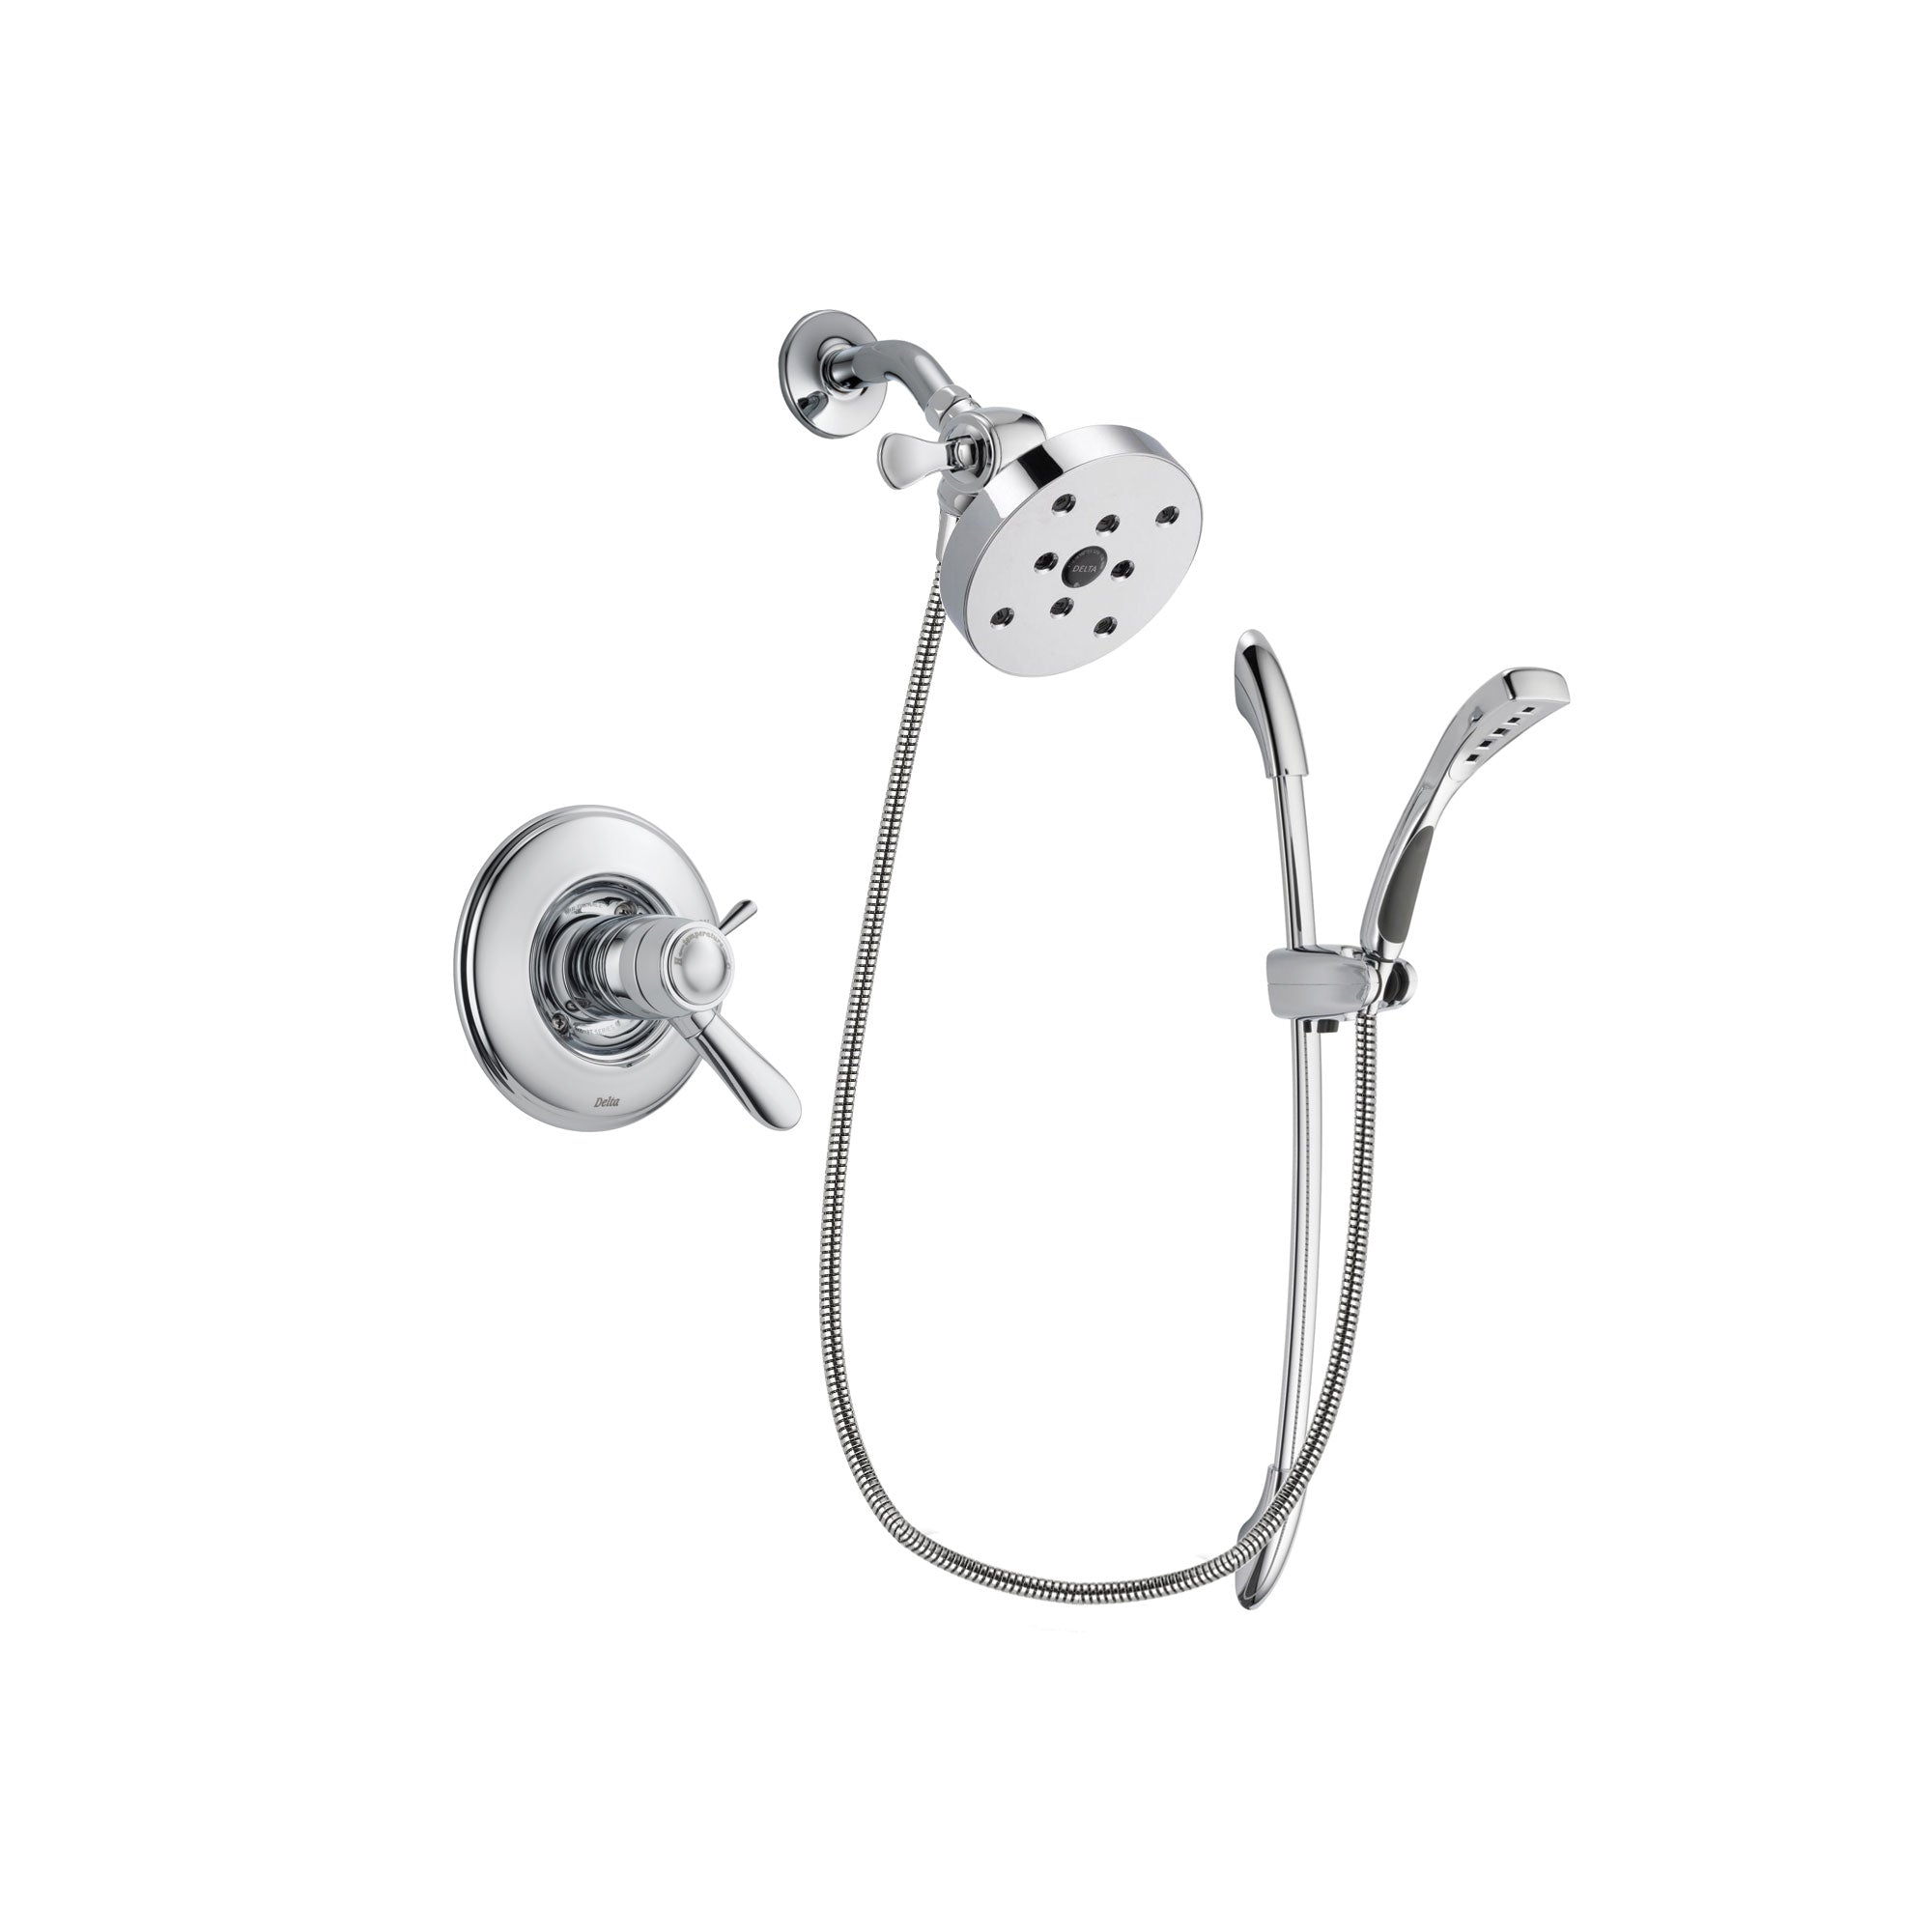 Delta Lahara Chrome Finish Thermostatic Shower Faucet System Package with 5-1/2 inch Shower Head and Handheld Shower with Slide Bar Includes Rough-in Valve DSP0528V